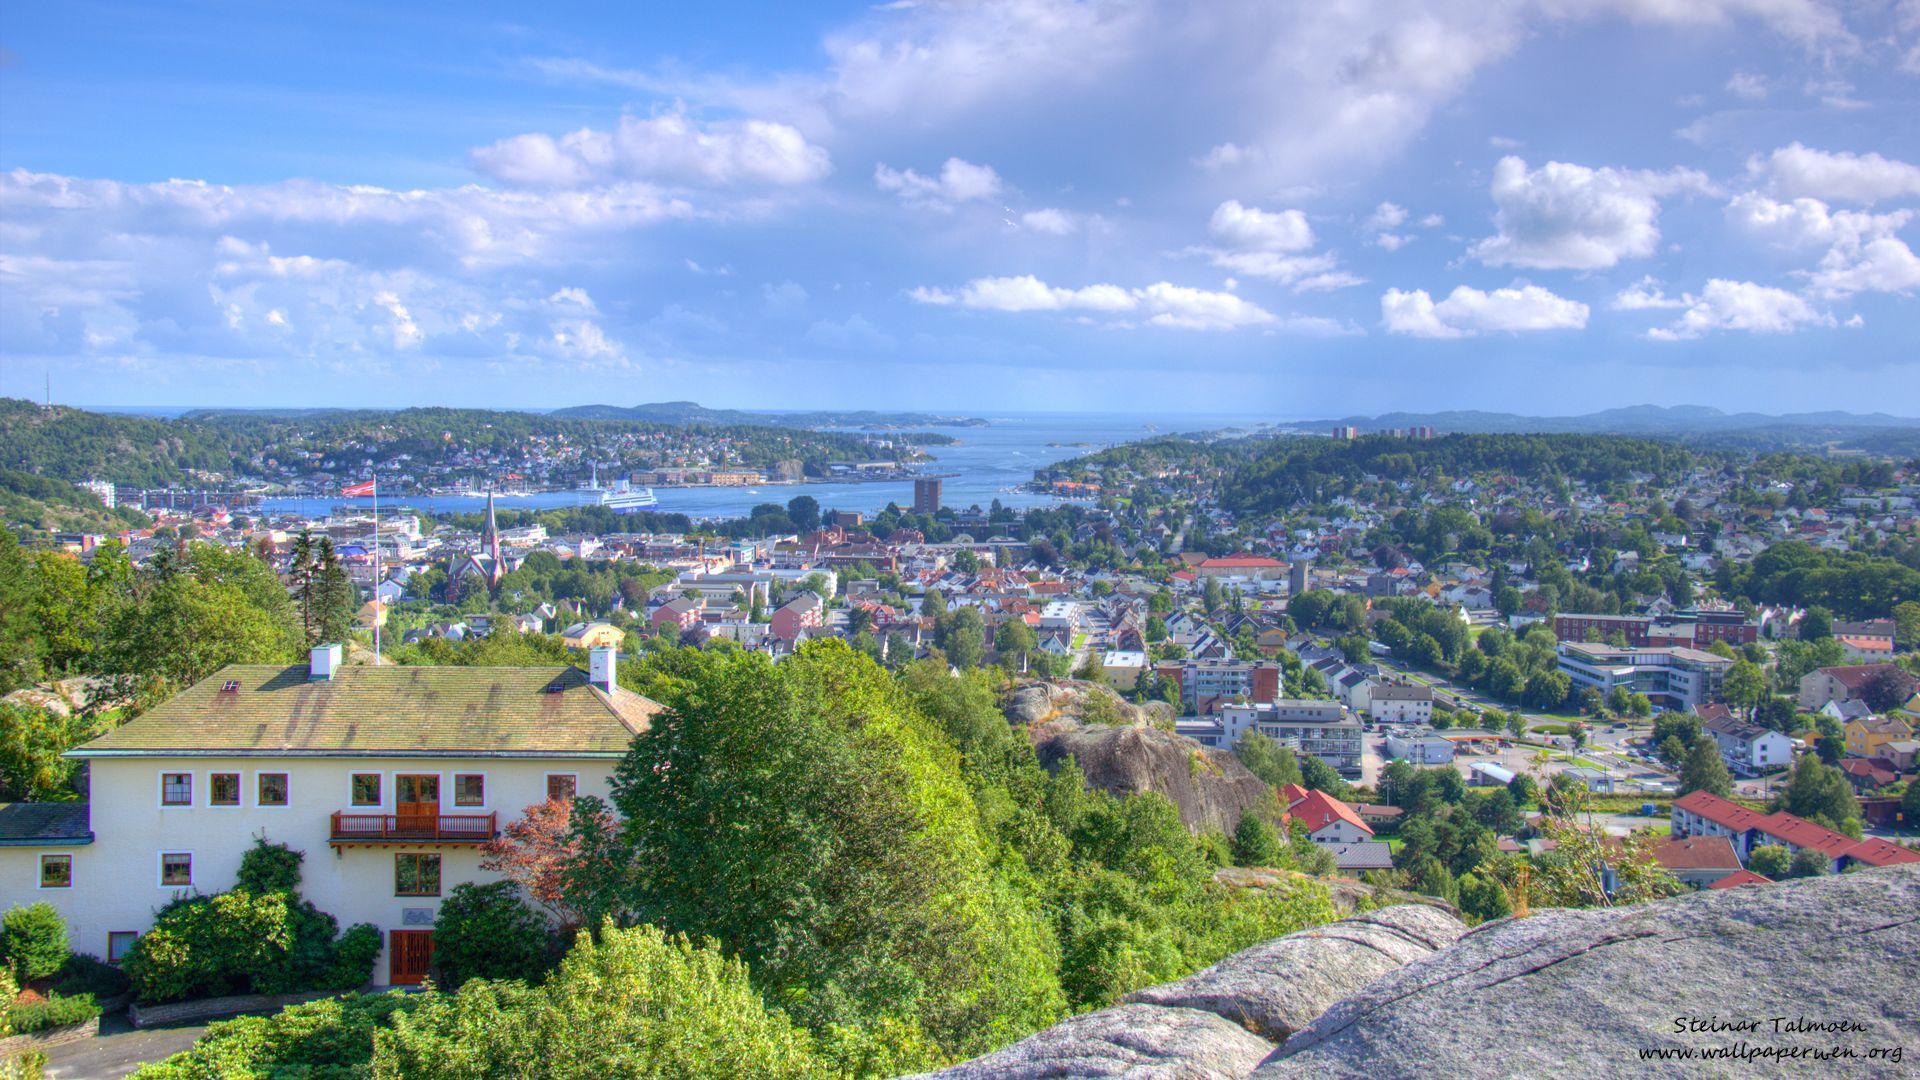 View from the hill on the Oslo wallpaper and image